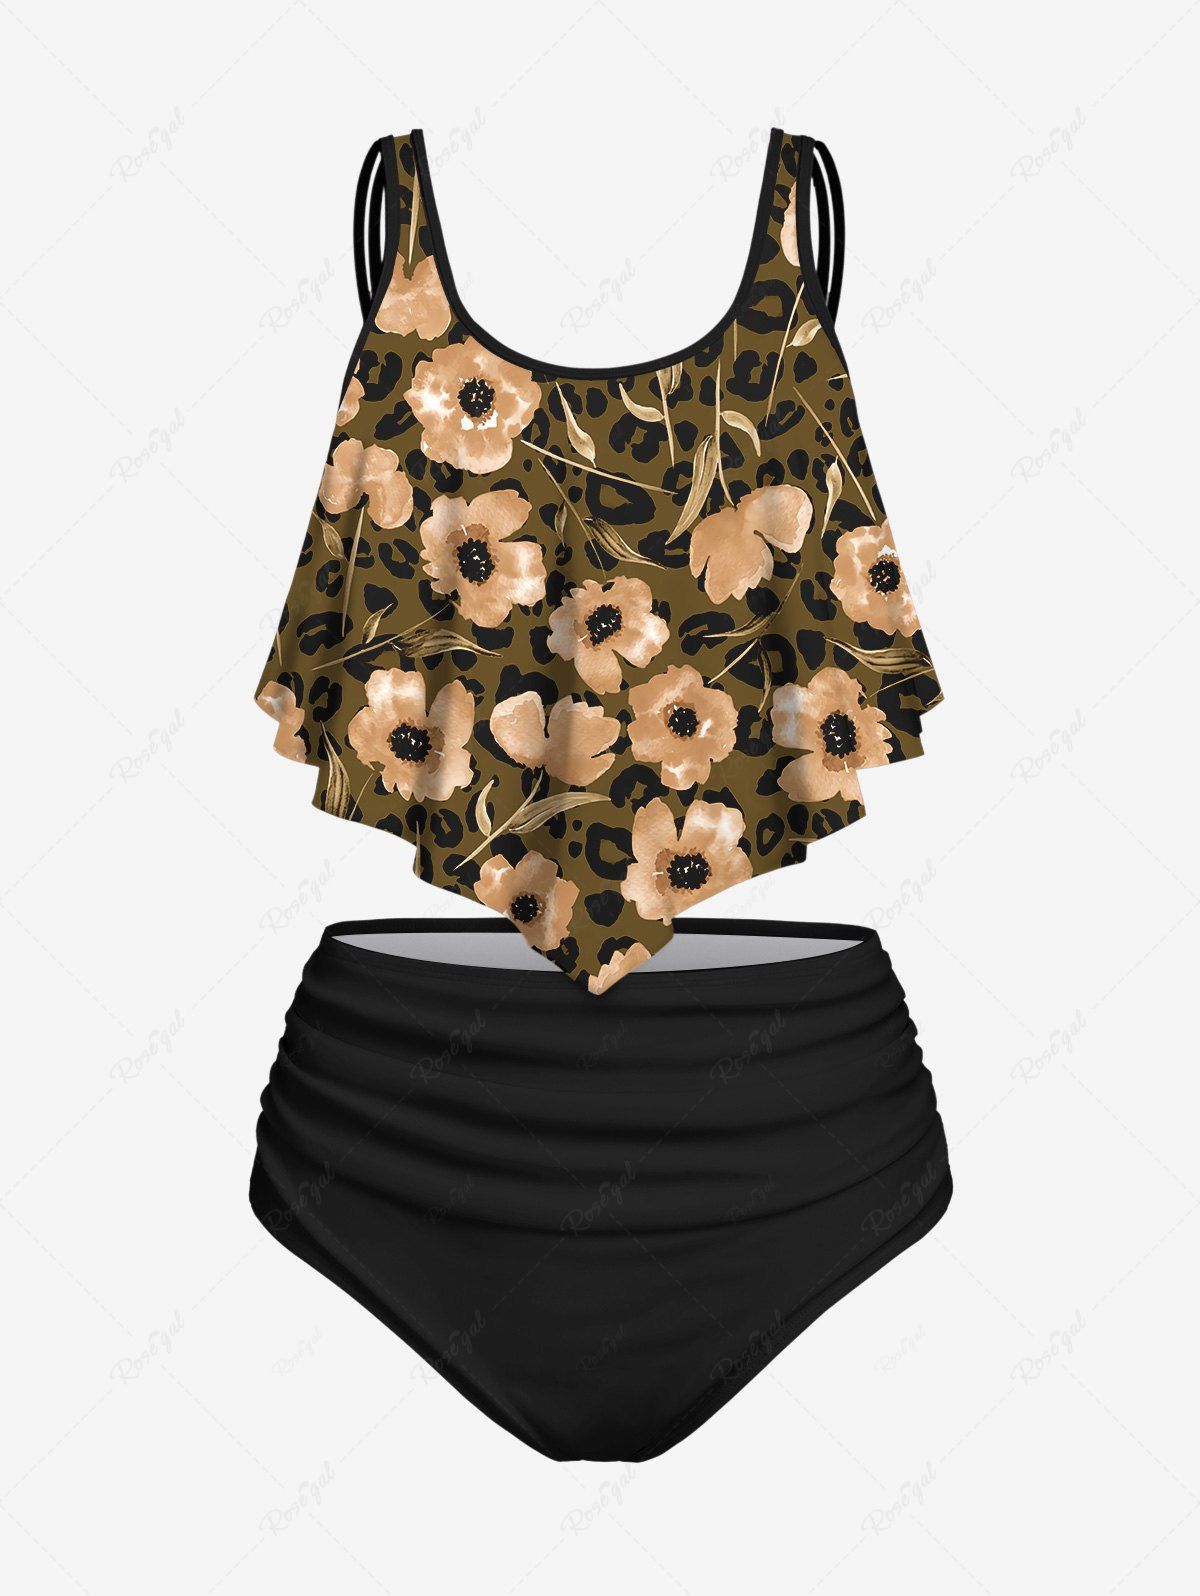 Chic Watercolor Floral Leaf Lip Print Flounce Trim Backless Tankini Top and Solid Ruched Full Coverage Swim Bottom Outfit  